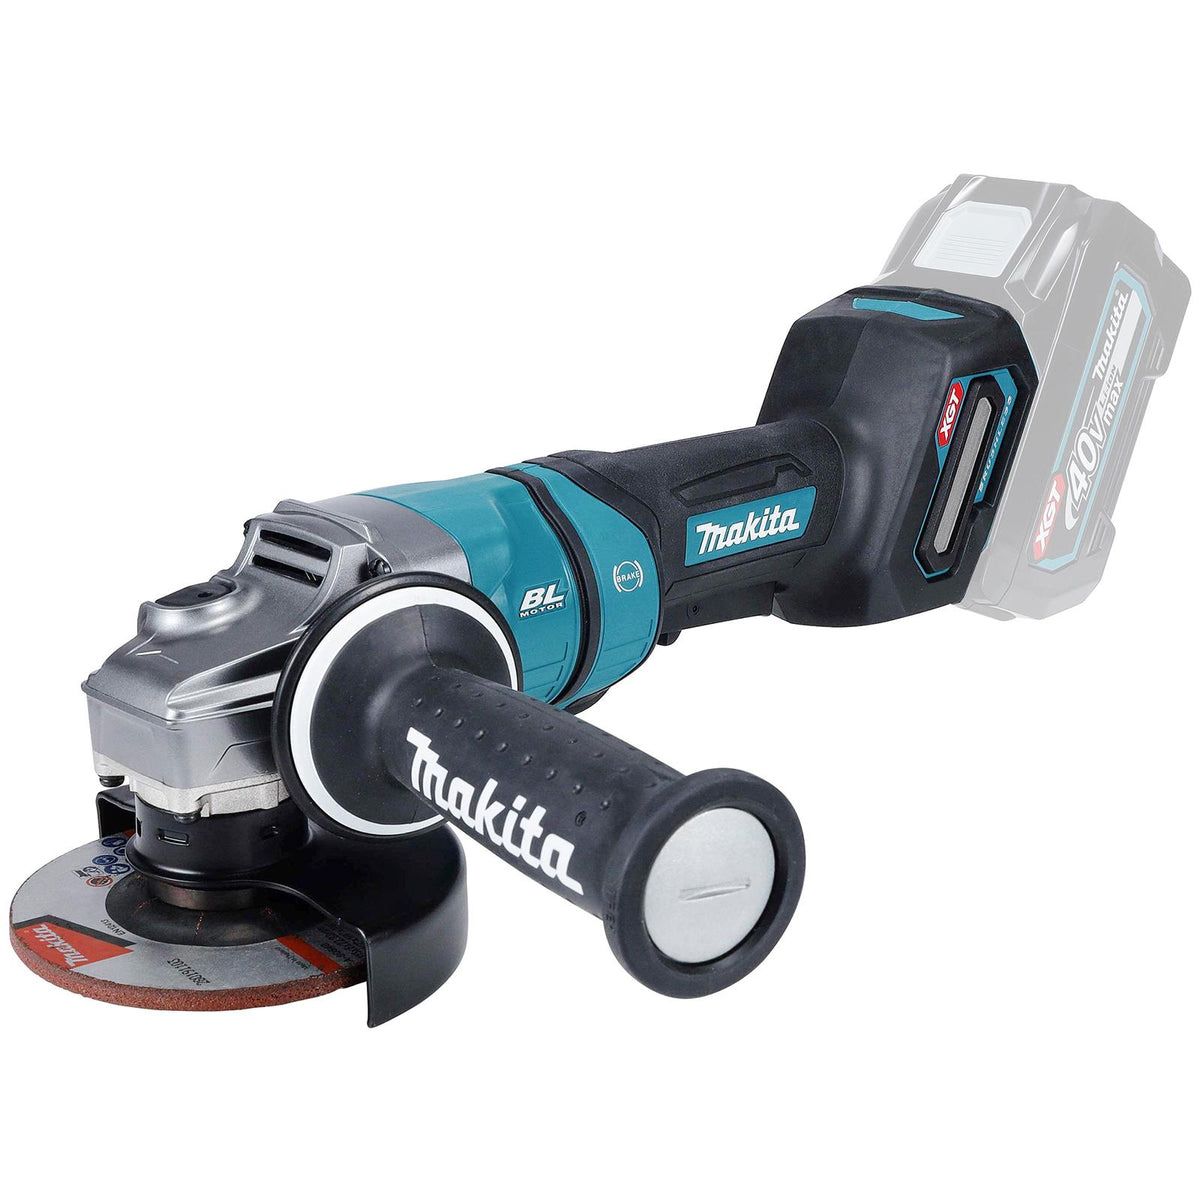 Makita GA049GZ01 40v XGT Max 115mm Brushless Angle Grinder Body Only With Carry Case